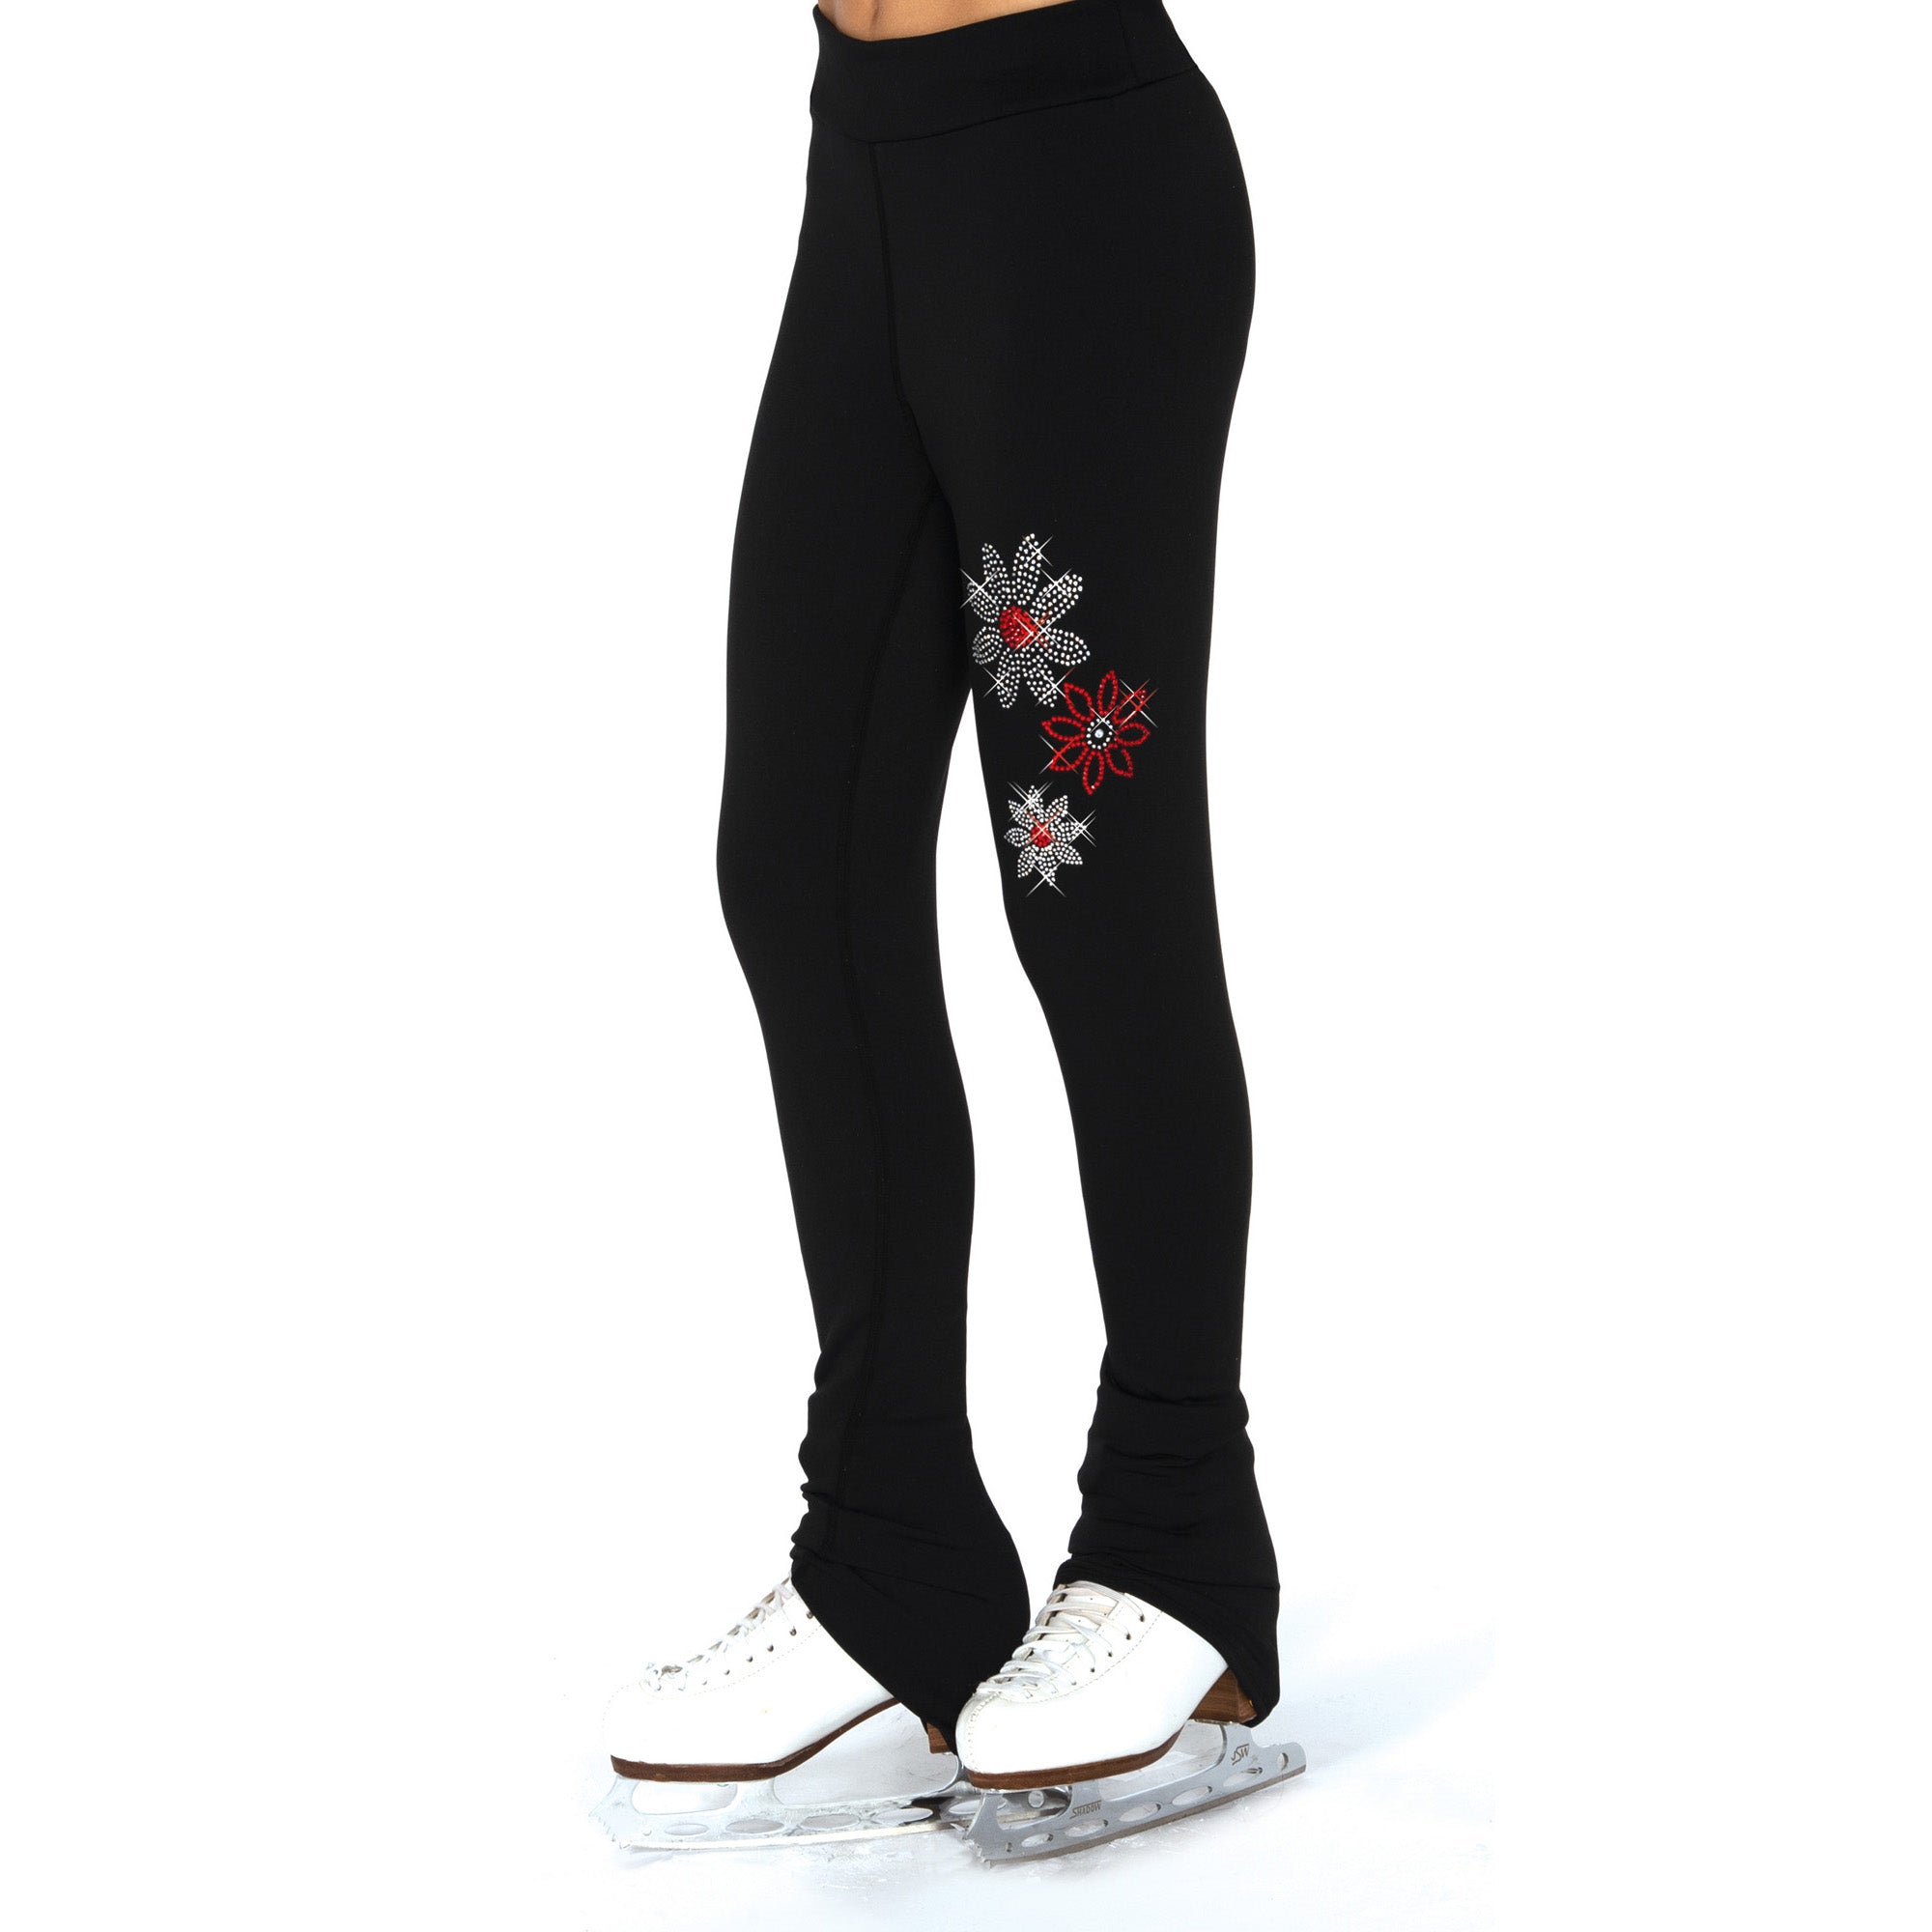 S113 Crystal Snow Daisy Leggings by Jerry's